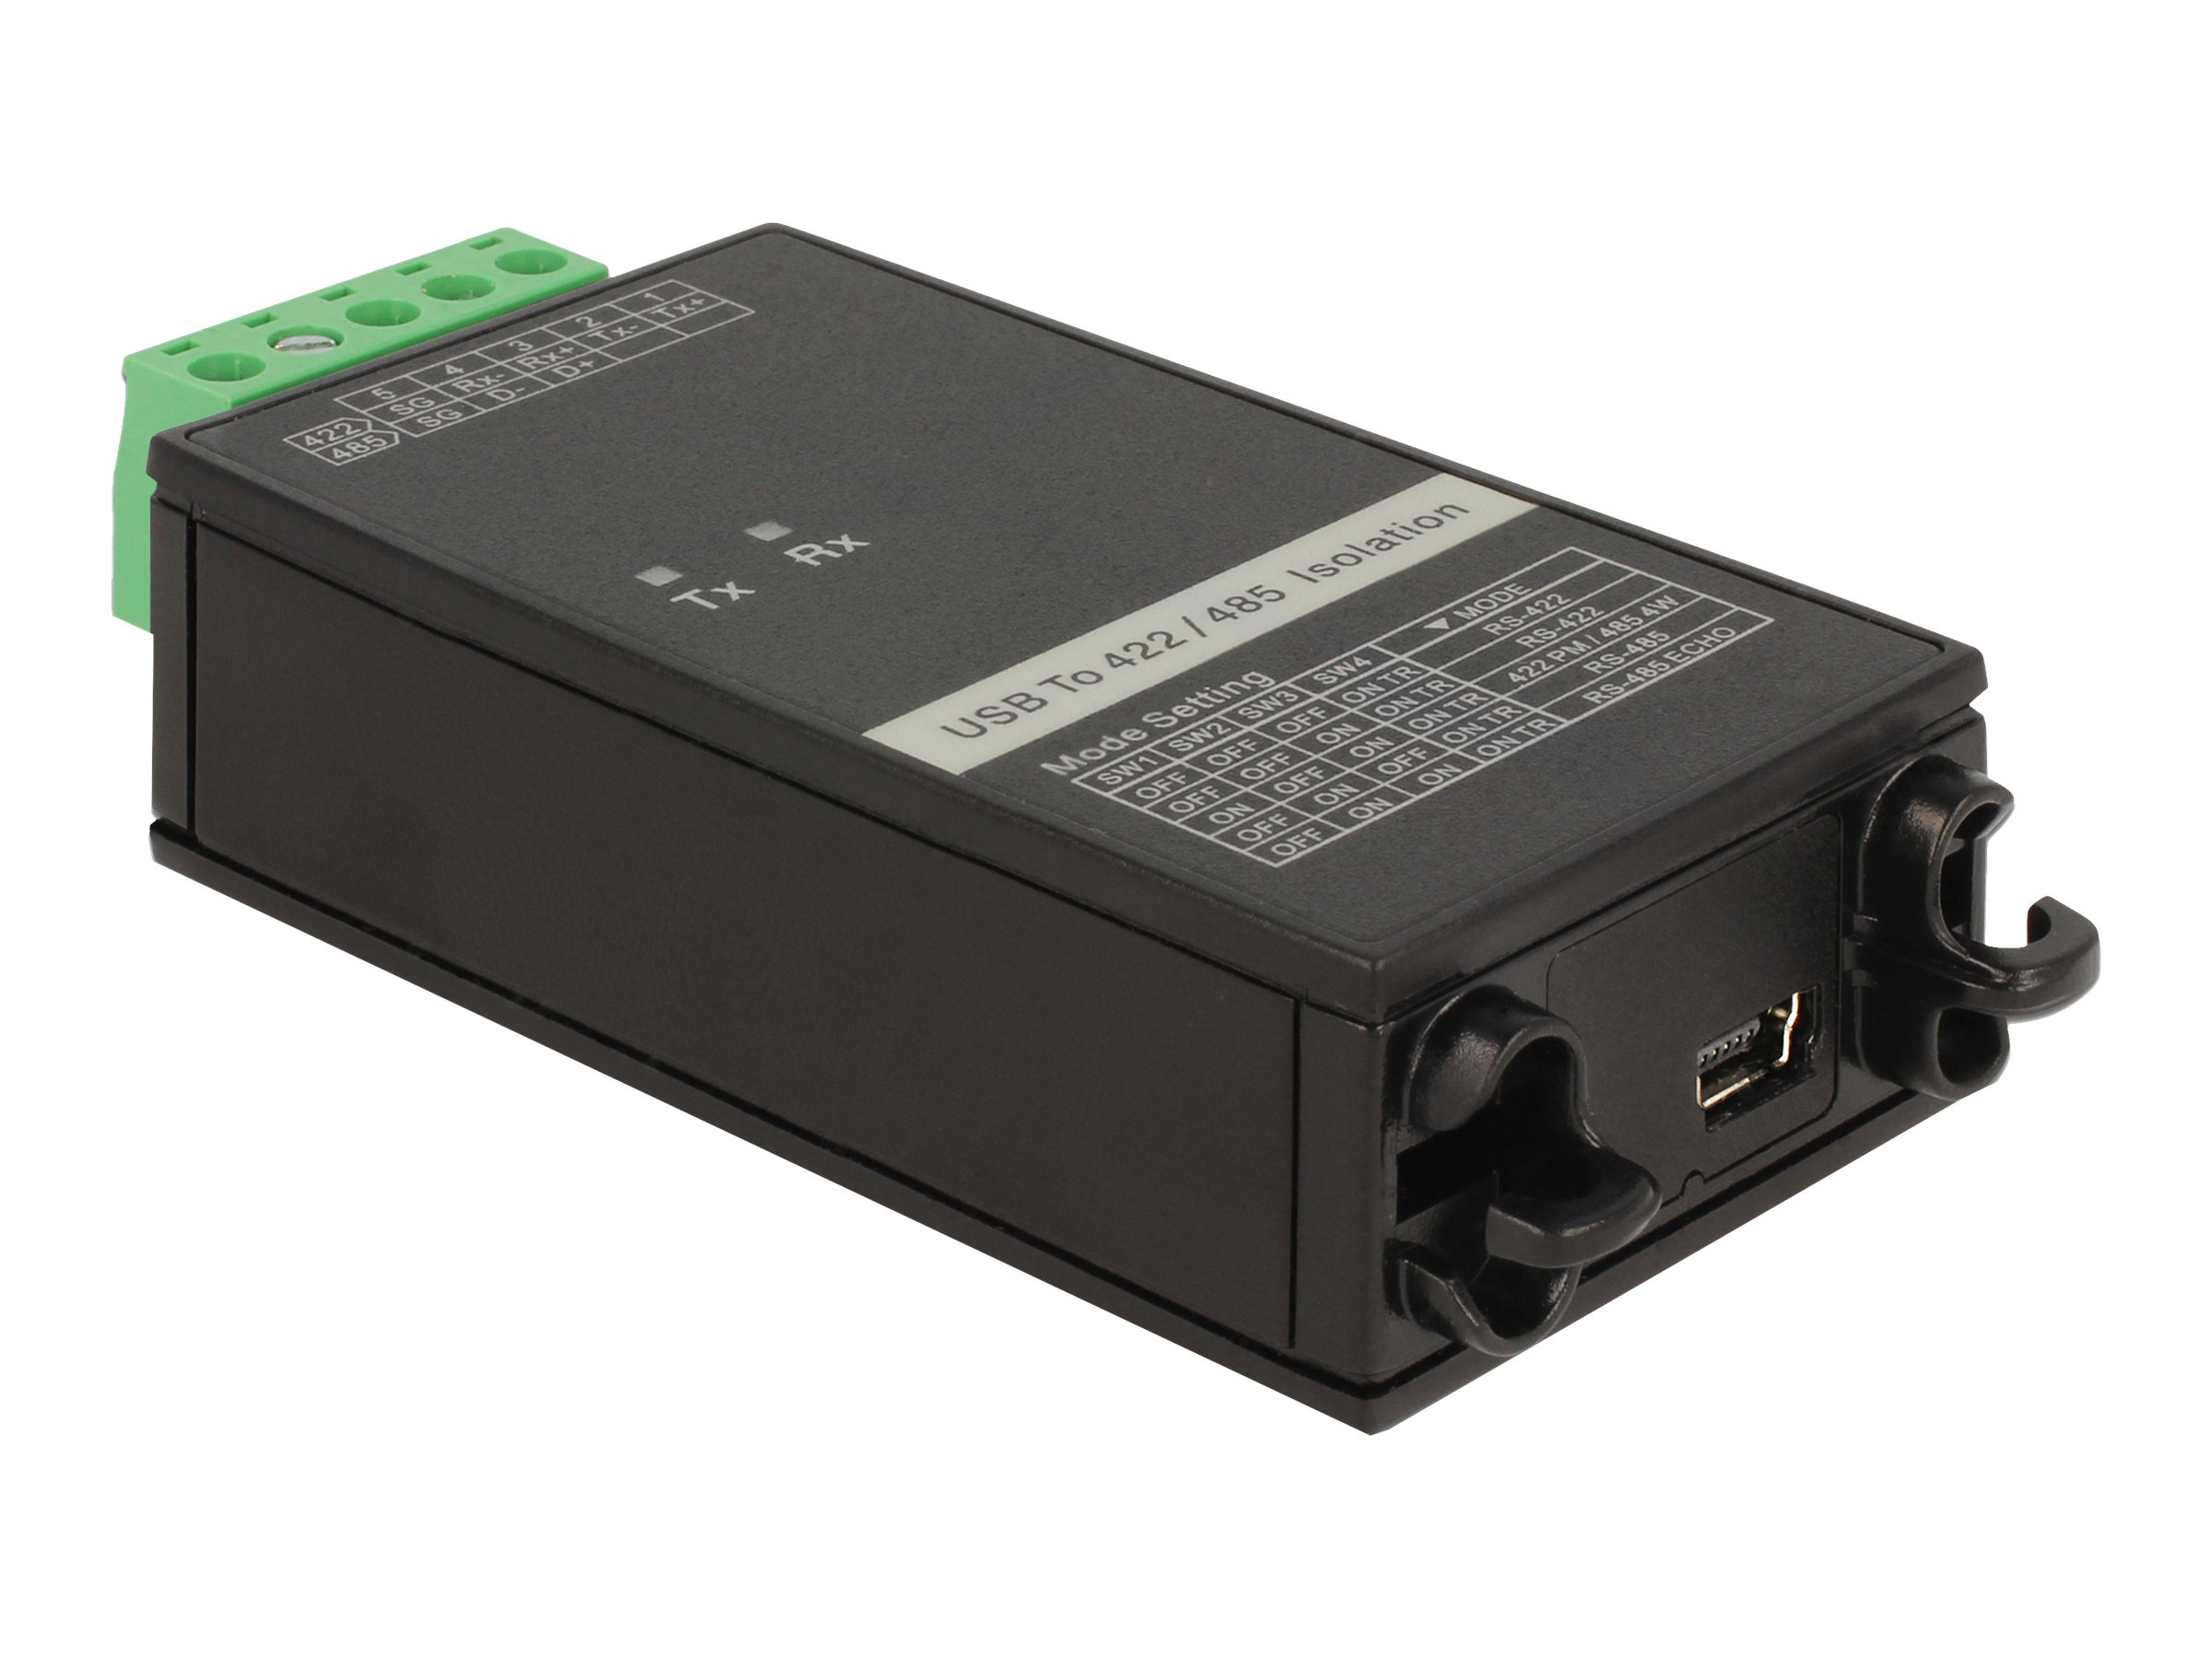 Delock Converter USB 2.0 > Serial RS-422/485 with 3 kV Isolation